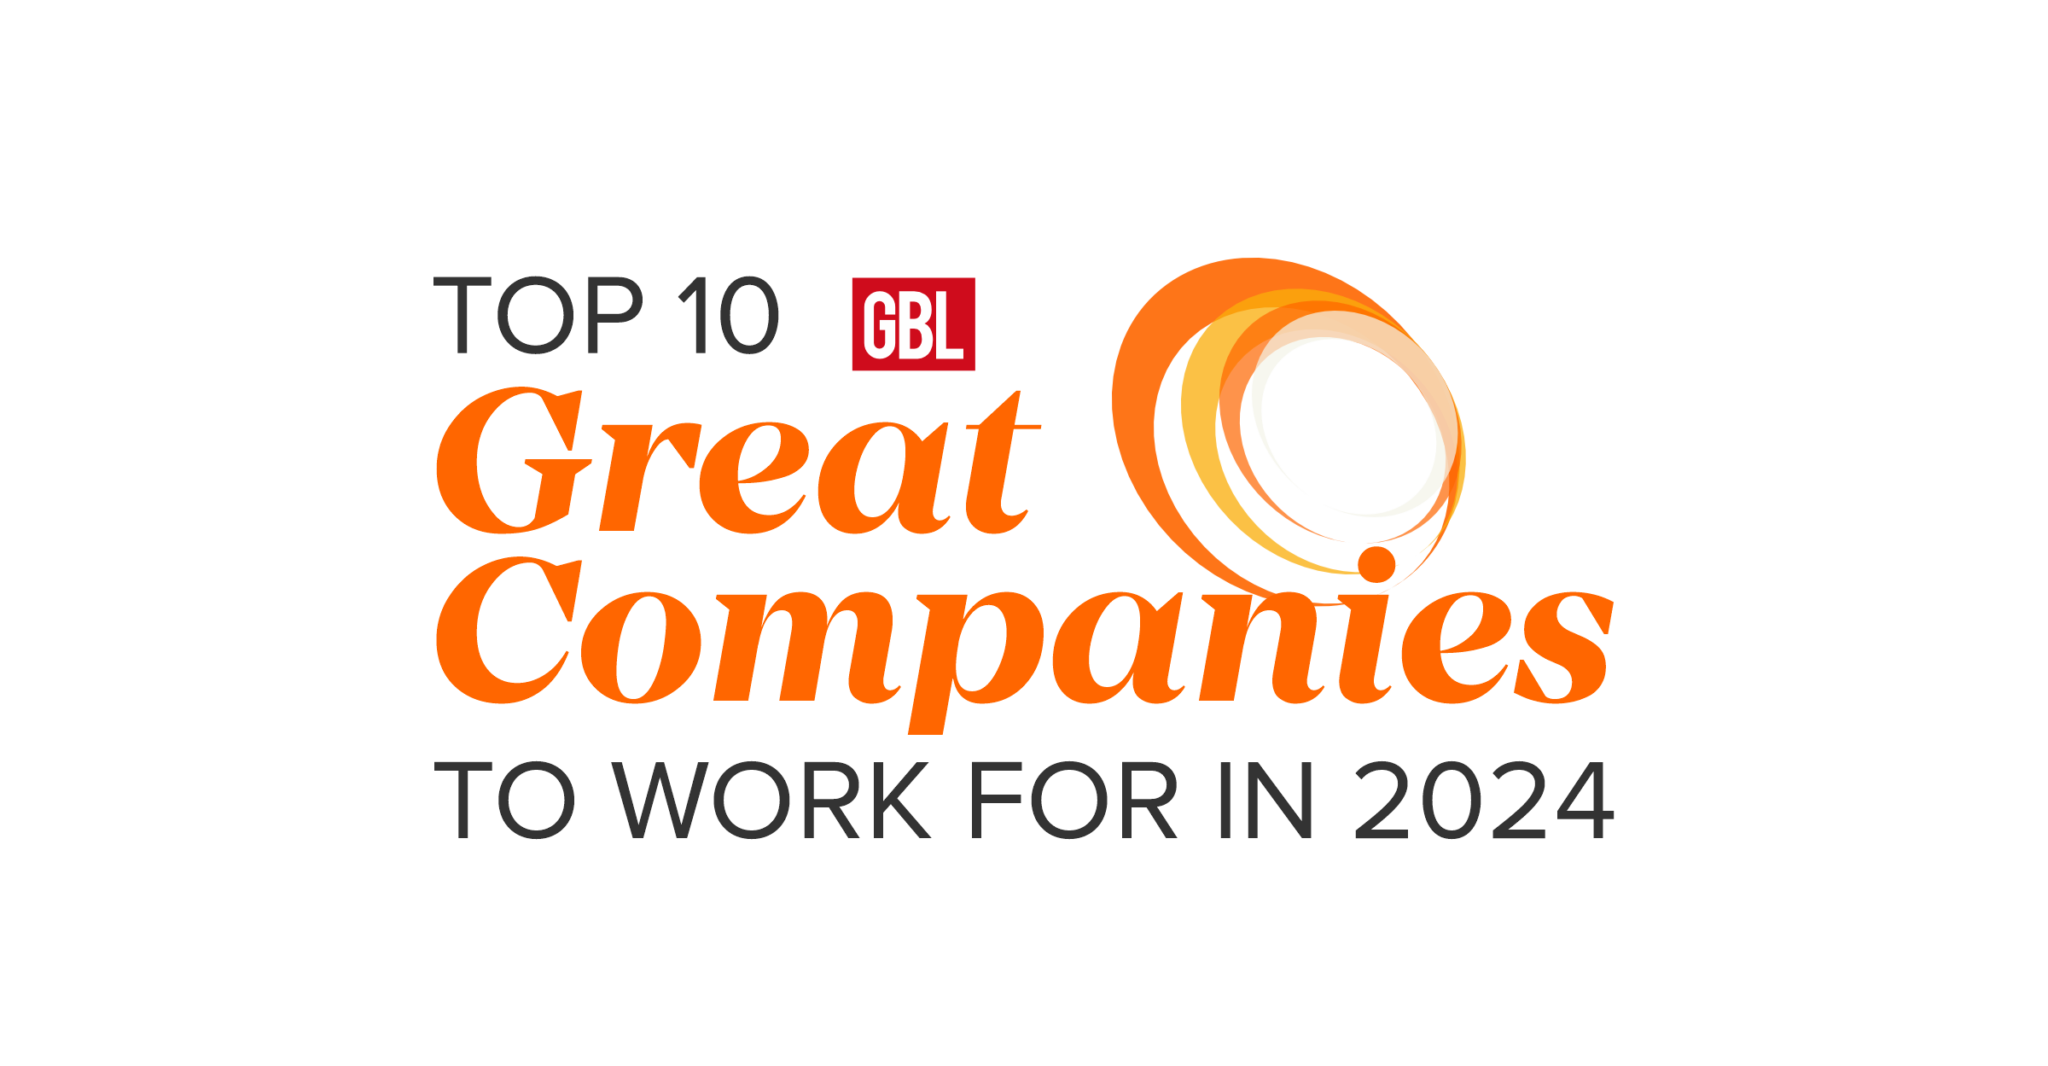 Top 10 Great Companies To Work For In 2024